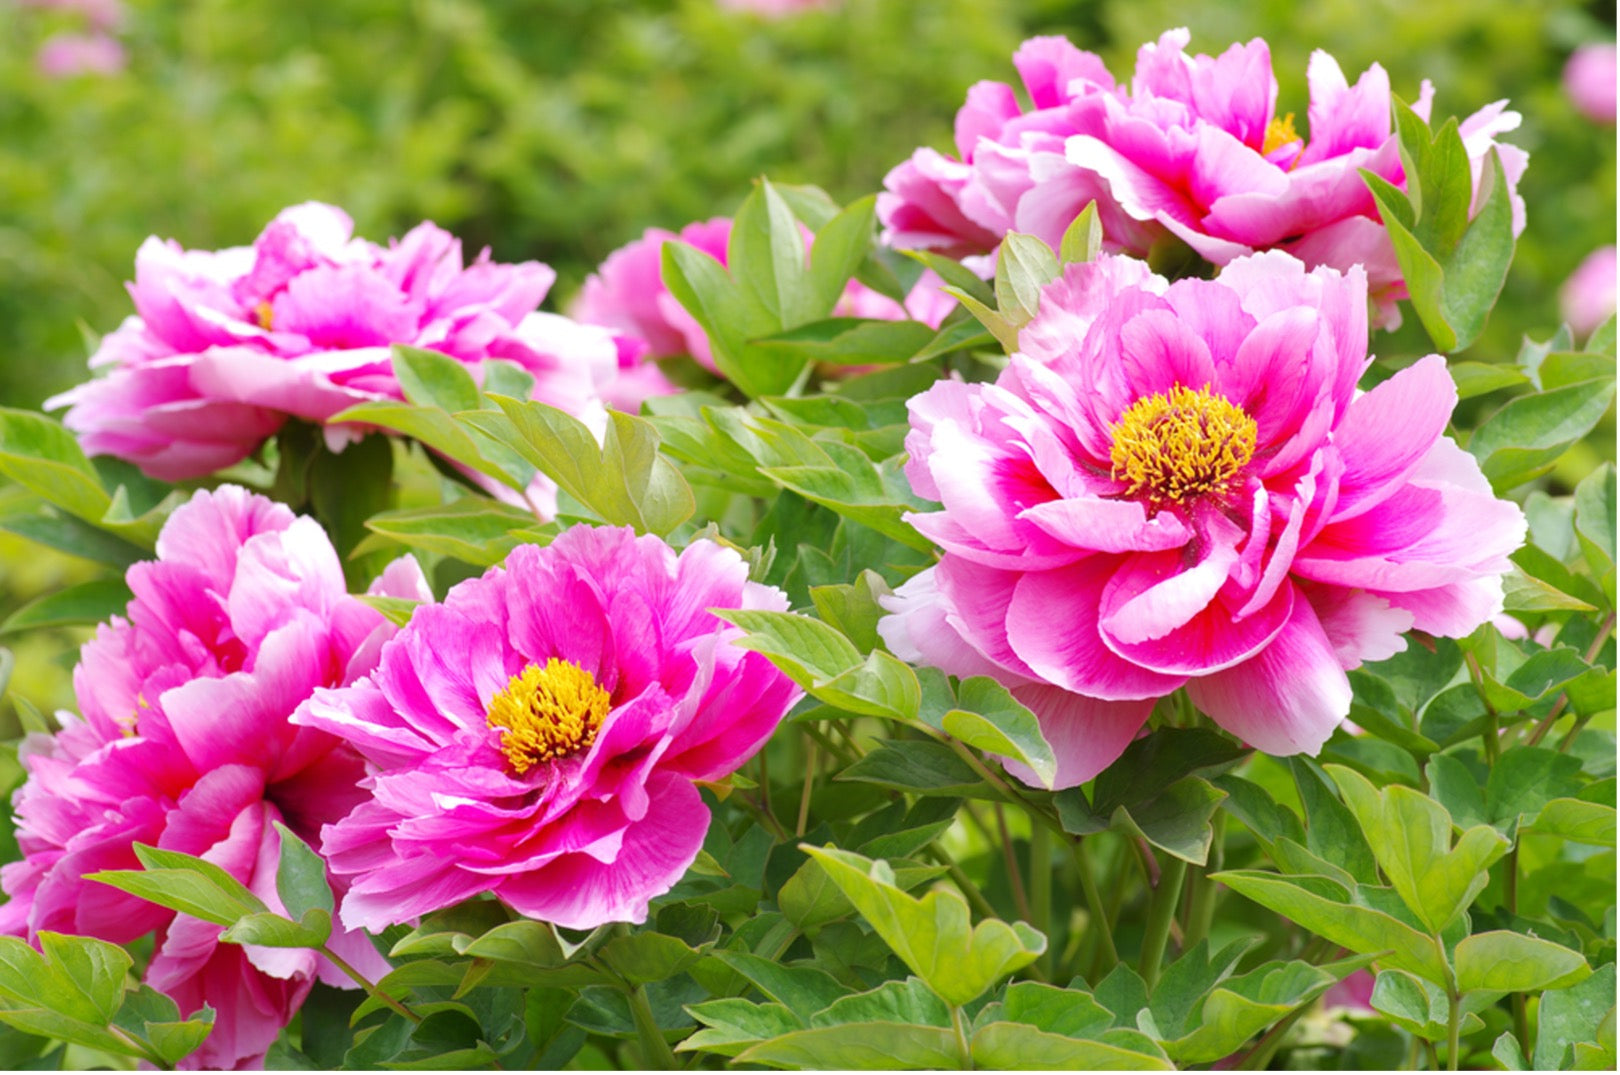 The Peony Flower in History